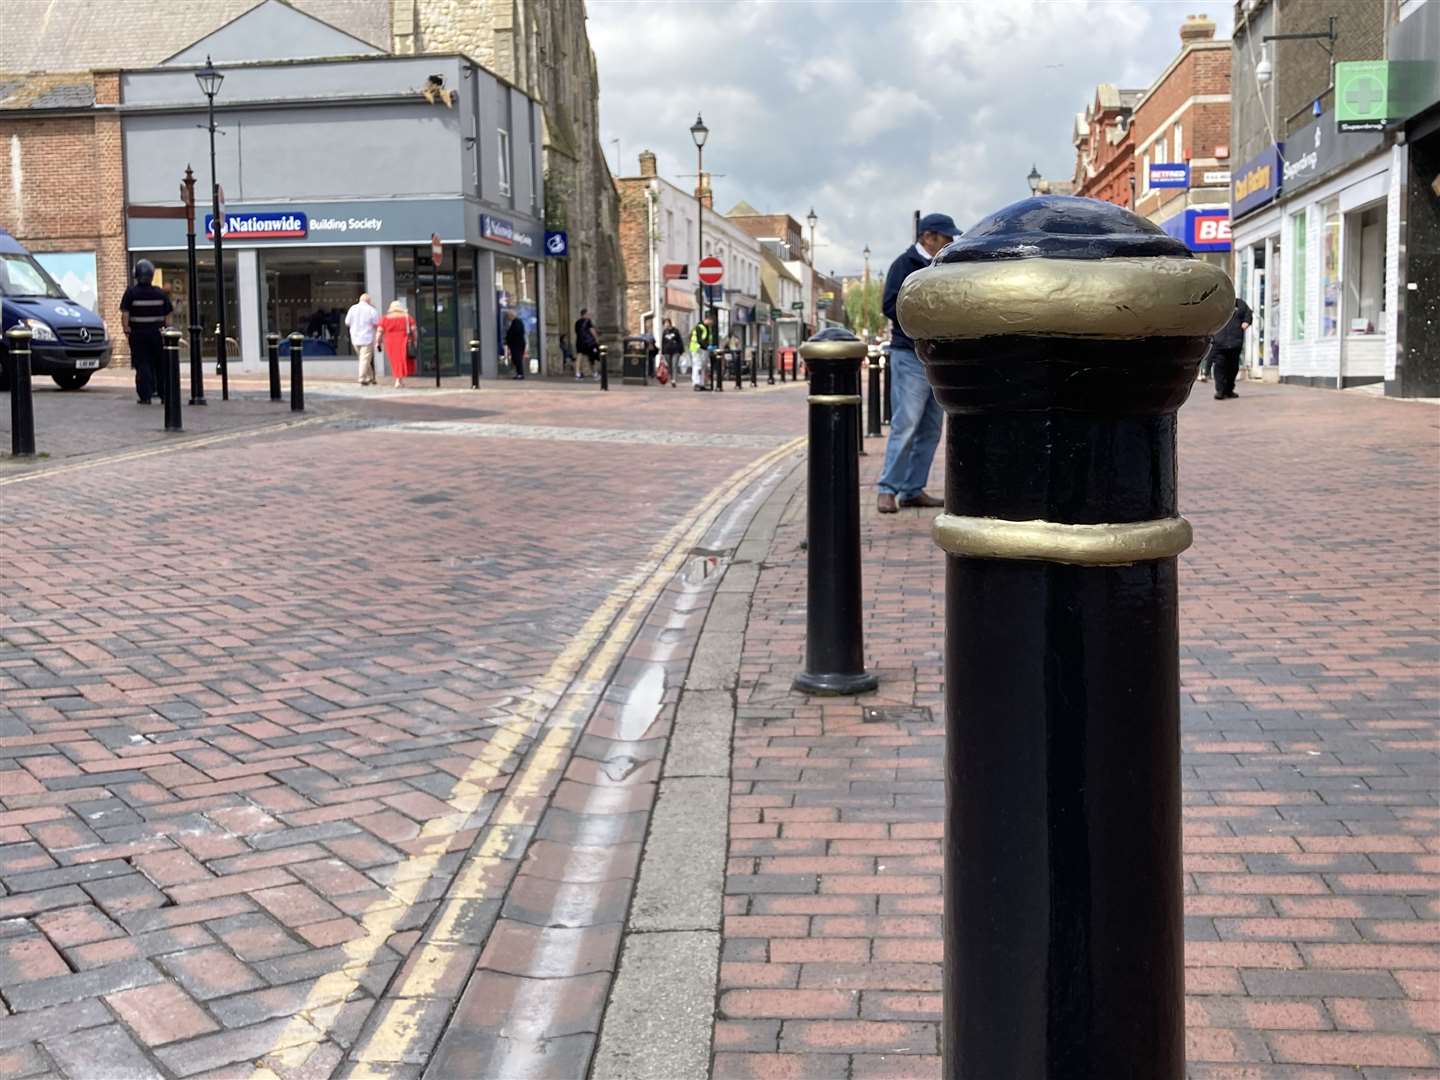 Painting the bollards in Sittingbourne in time for the Queen's Platinum Jubilee